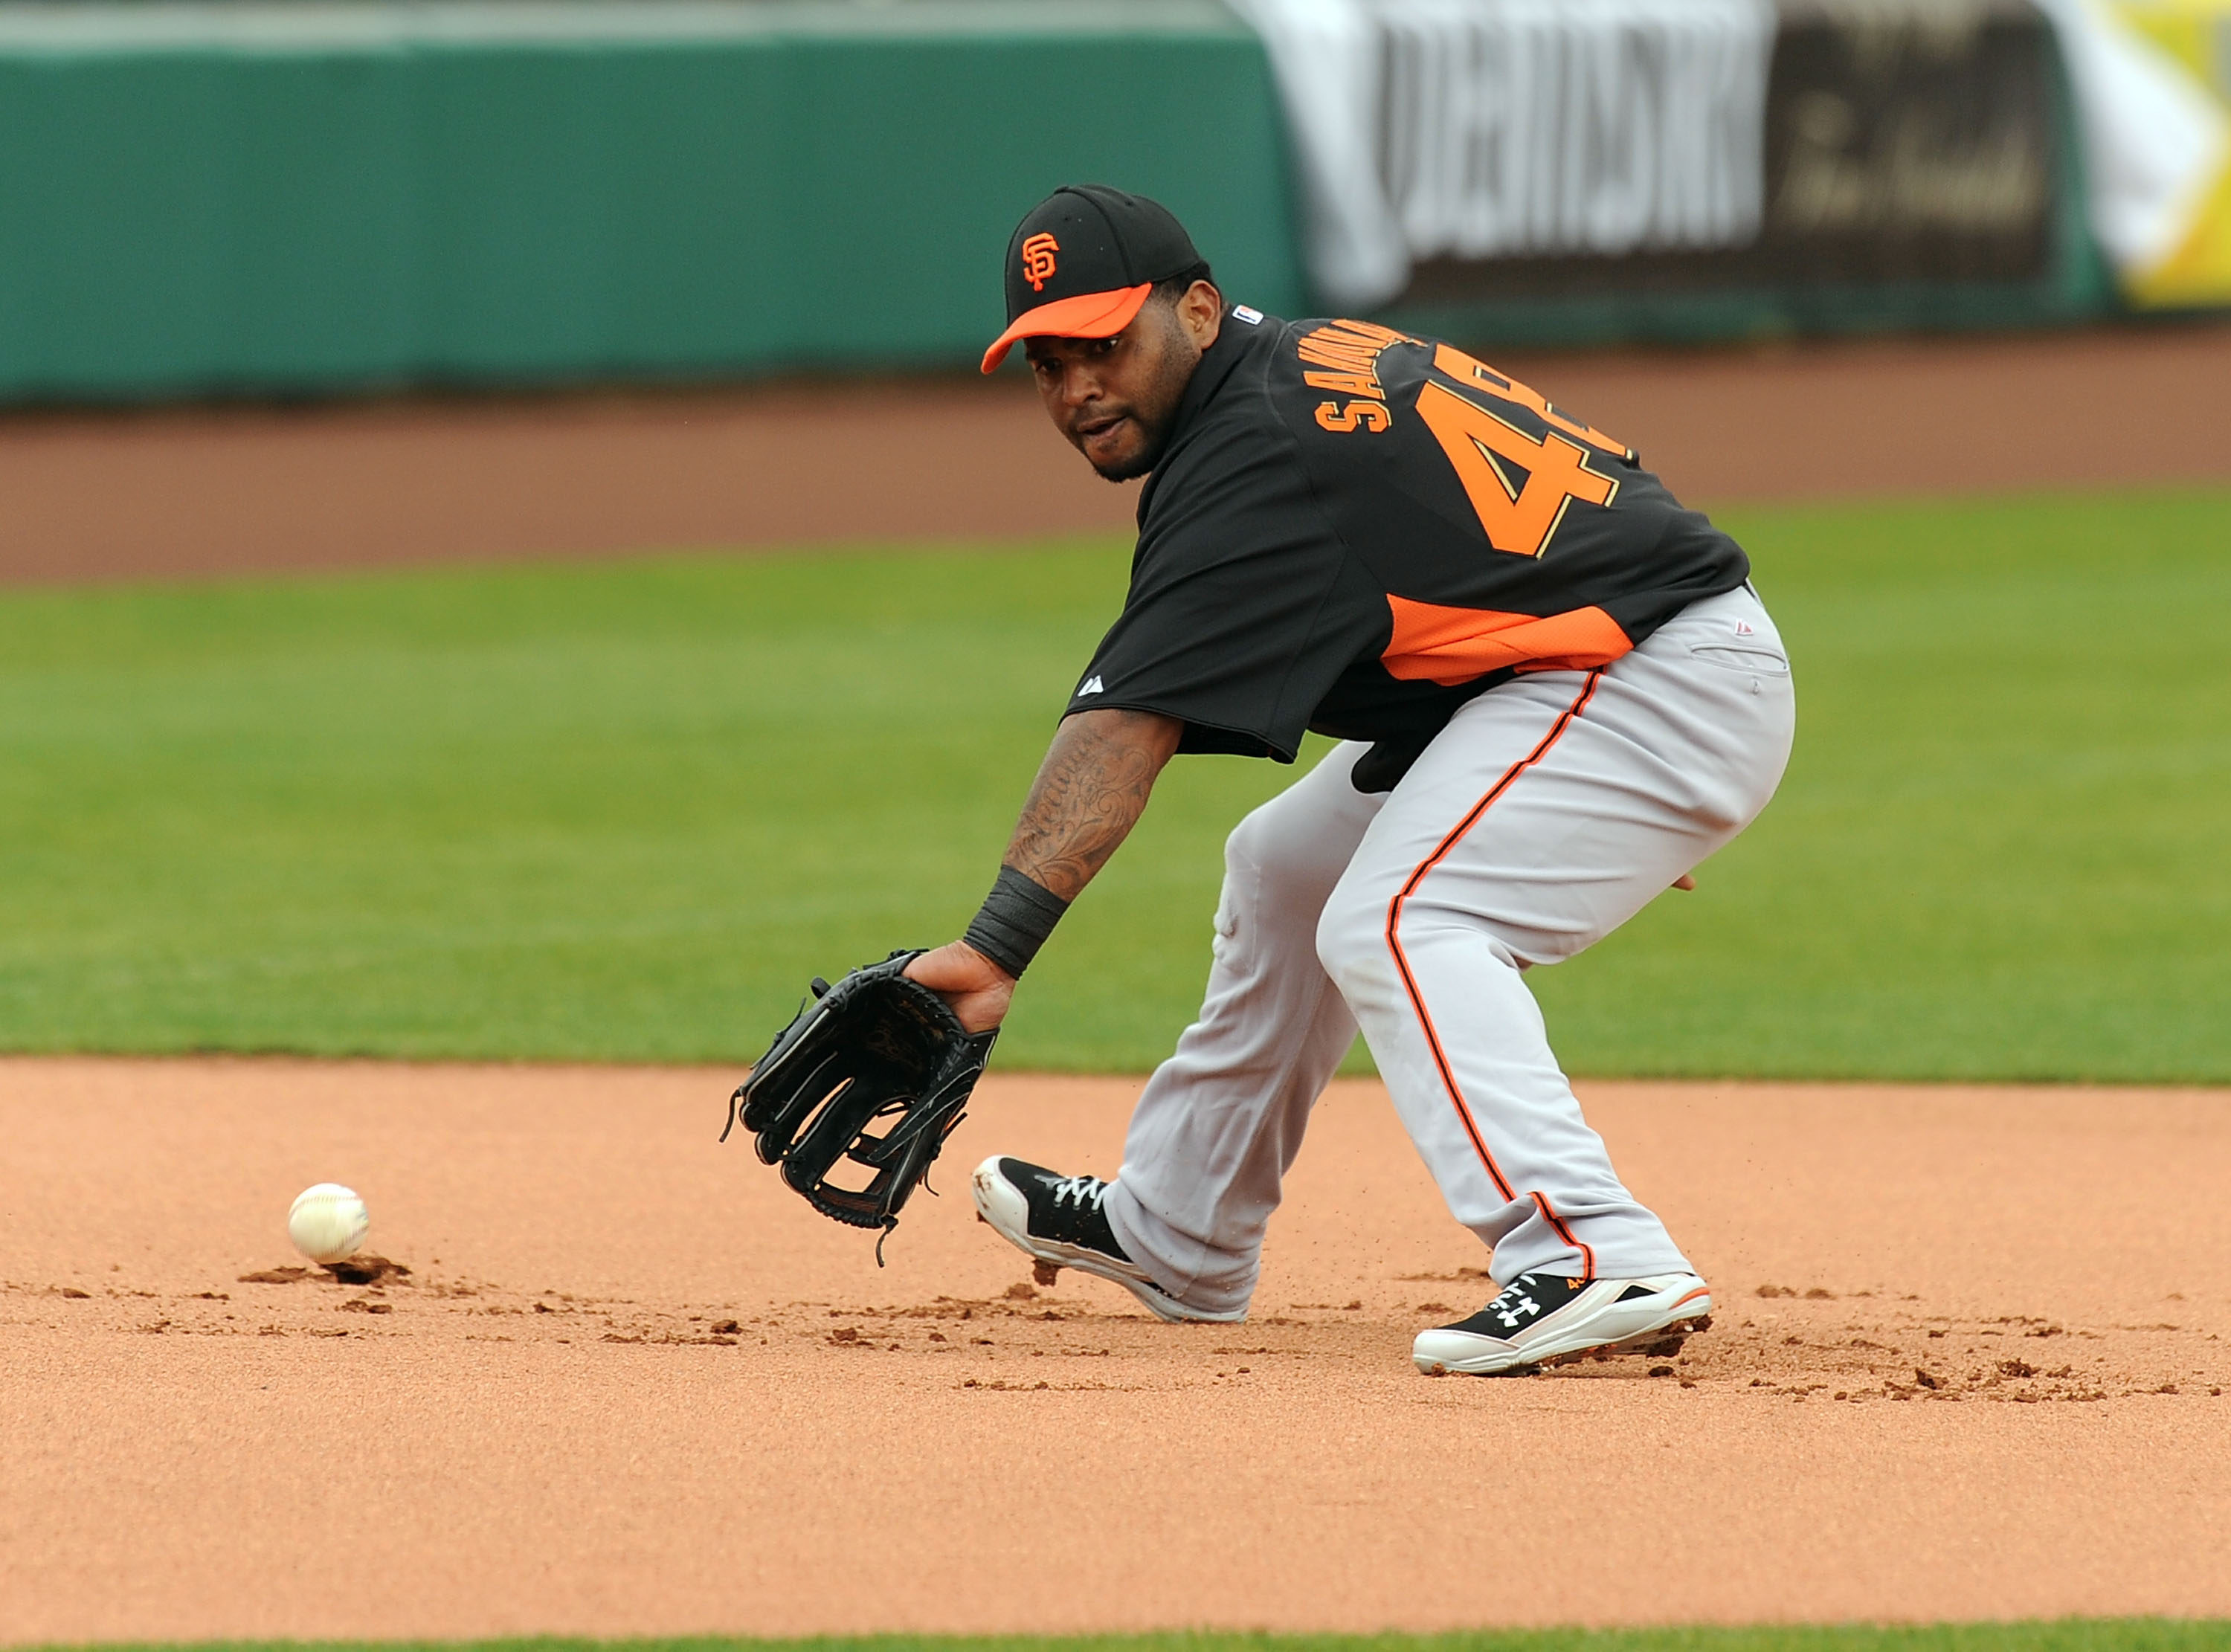 Pablo Sandoval May Be 42 Pounds Lighter When He Enters Giants